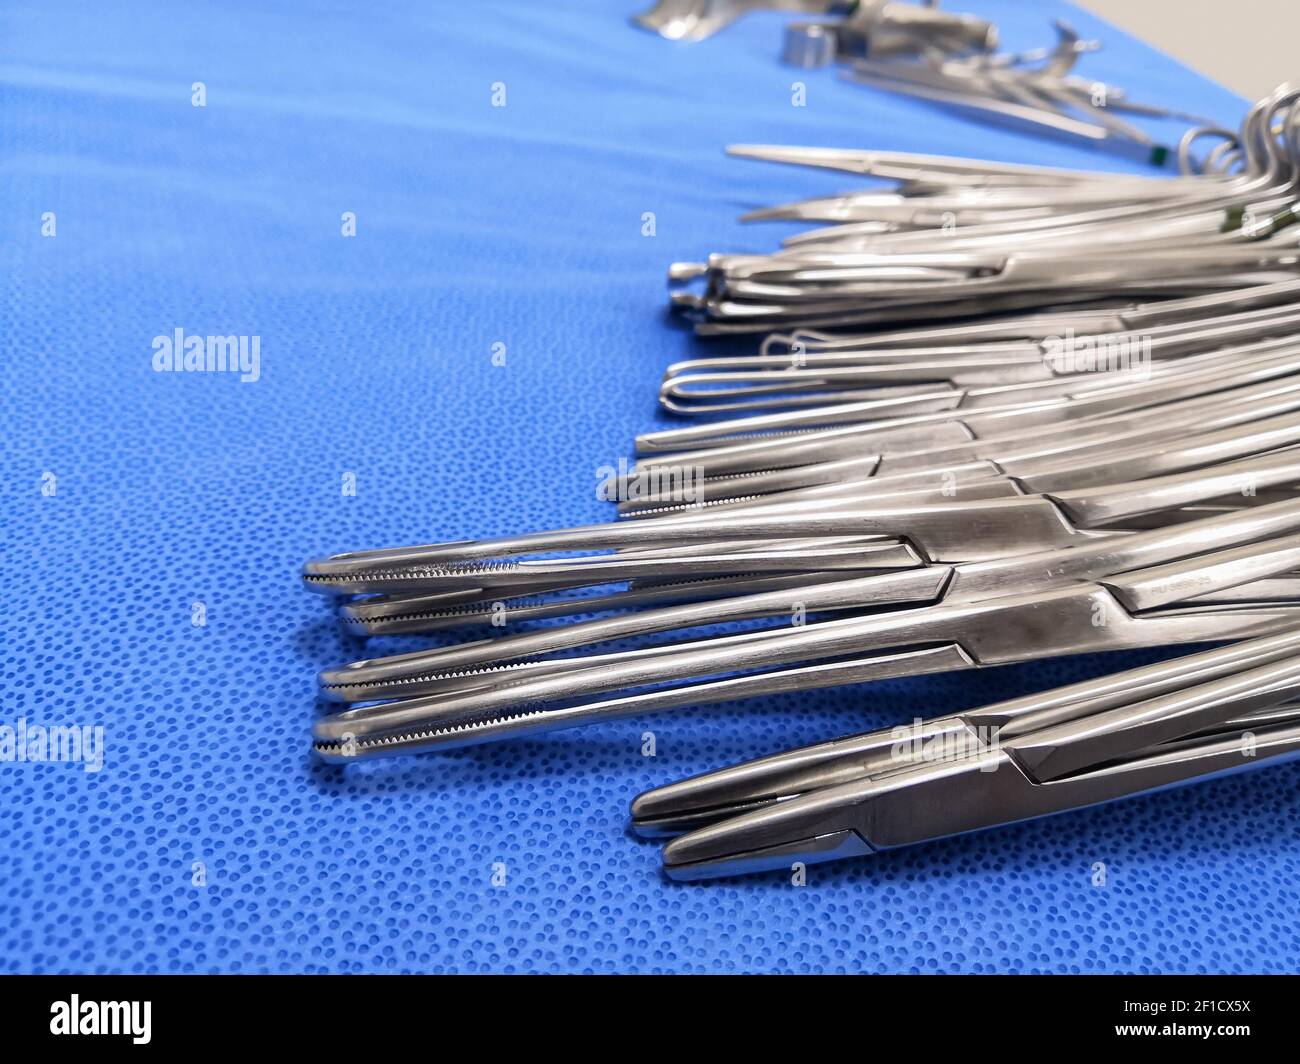 Gynecological Surgical Instruments Tips. Selective Focus To Needle Holder Tip Stock Photo